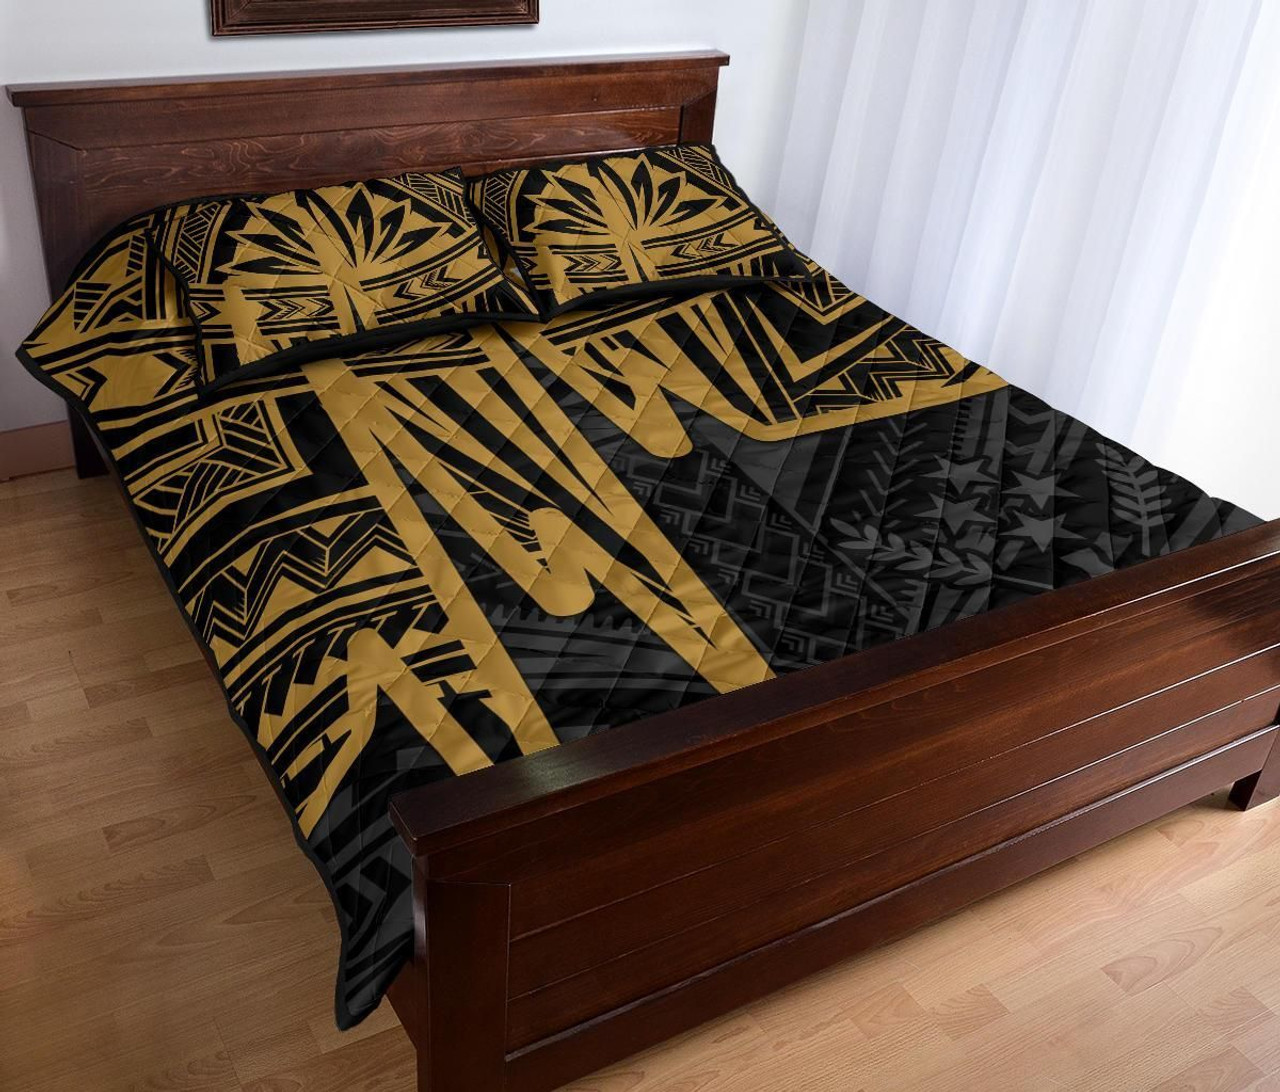 Kosrae Quilt Bed Set - Kosrae Seal In Heartbeat Patterns Style (Gold) 3